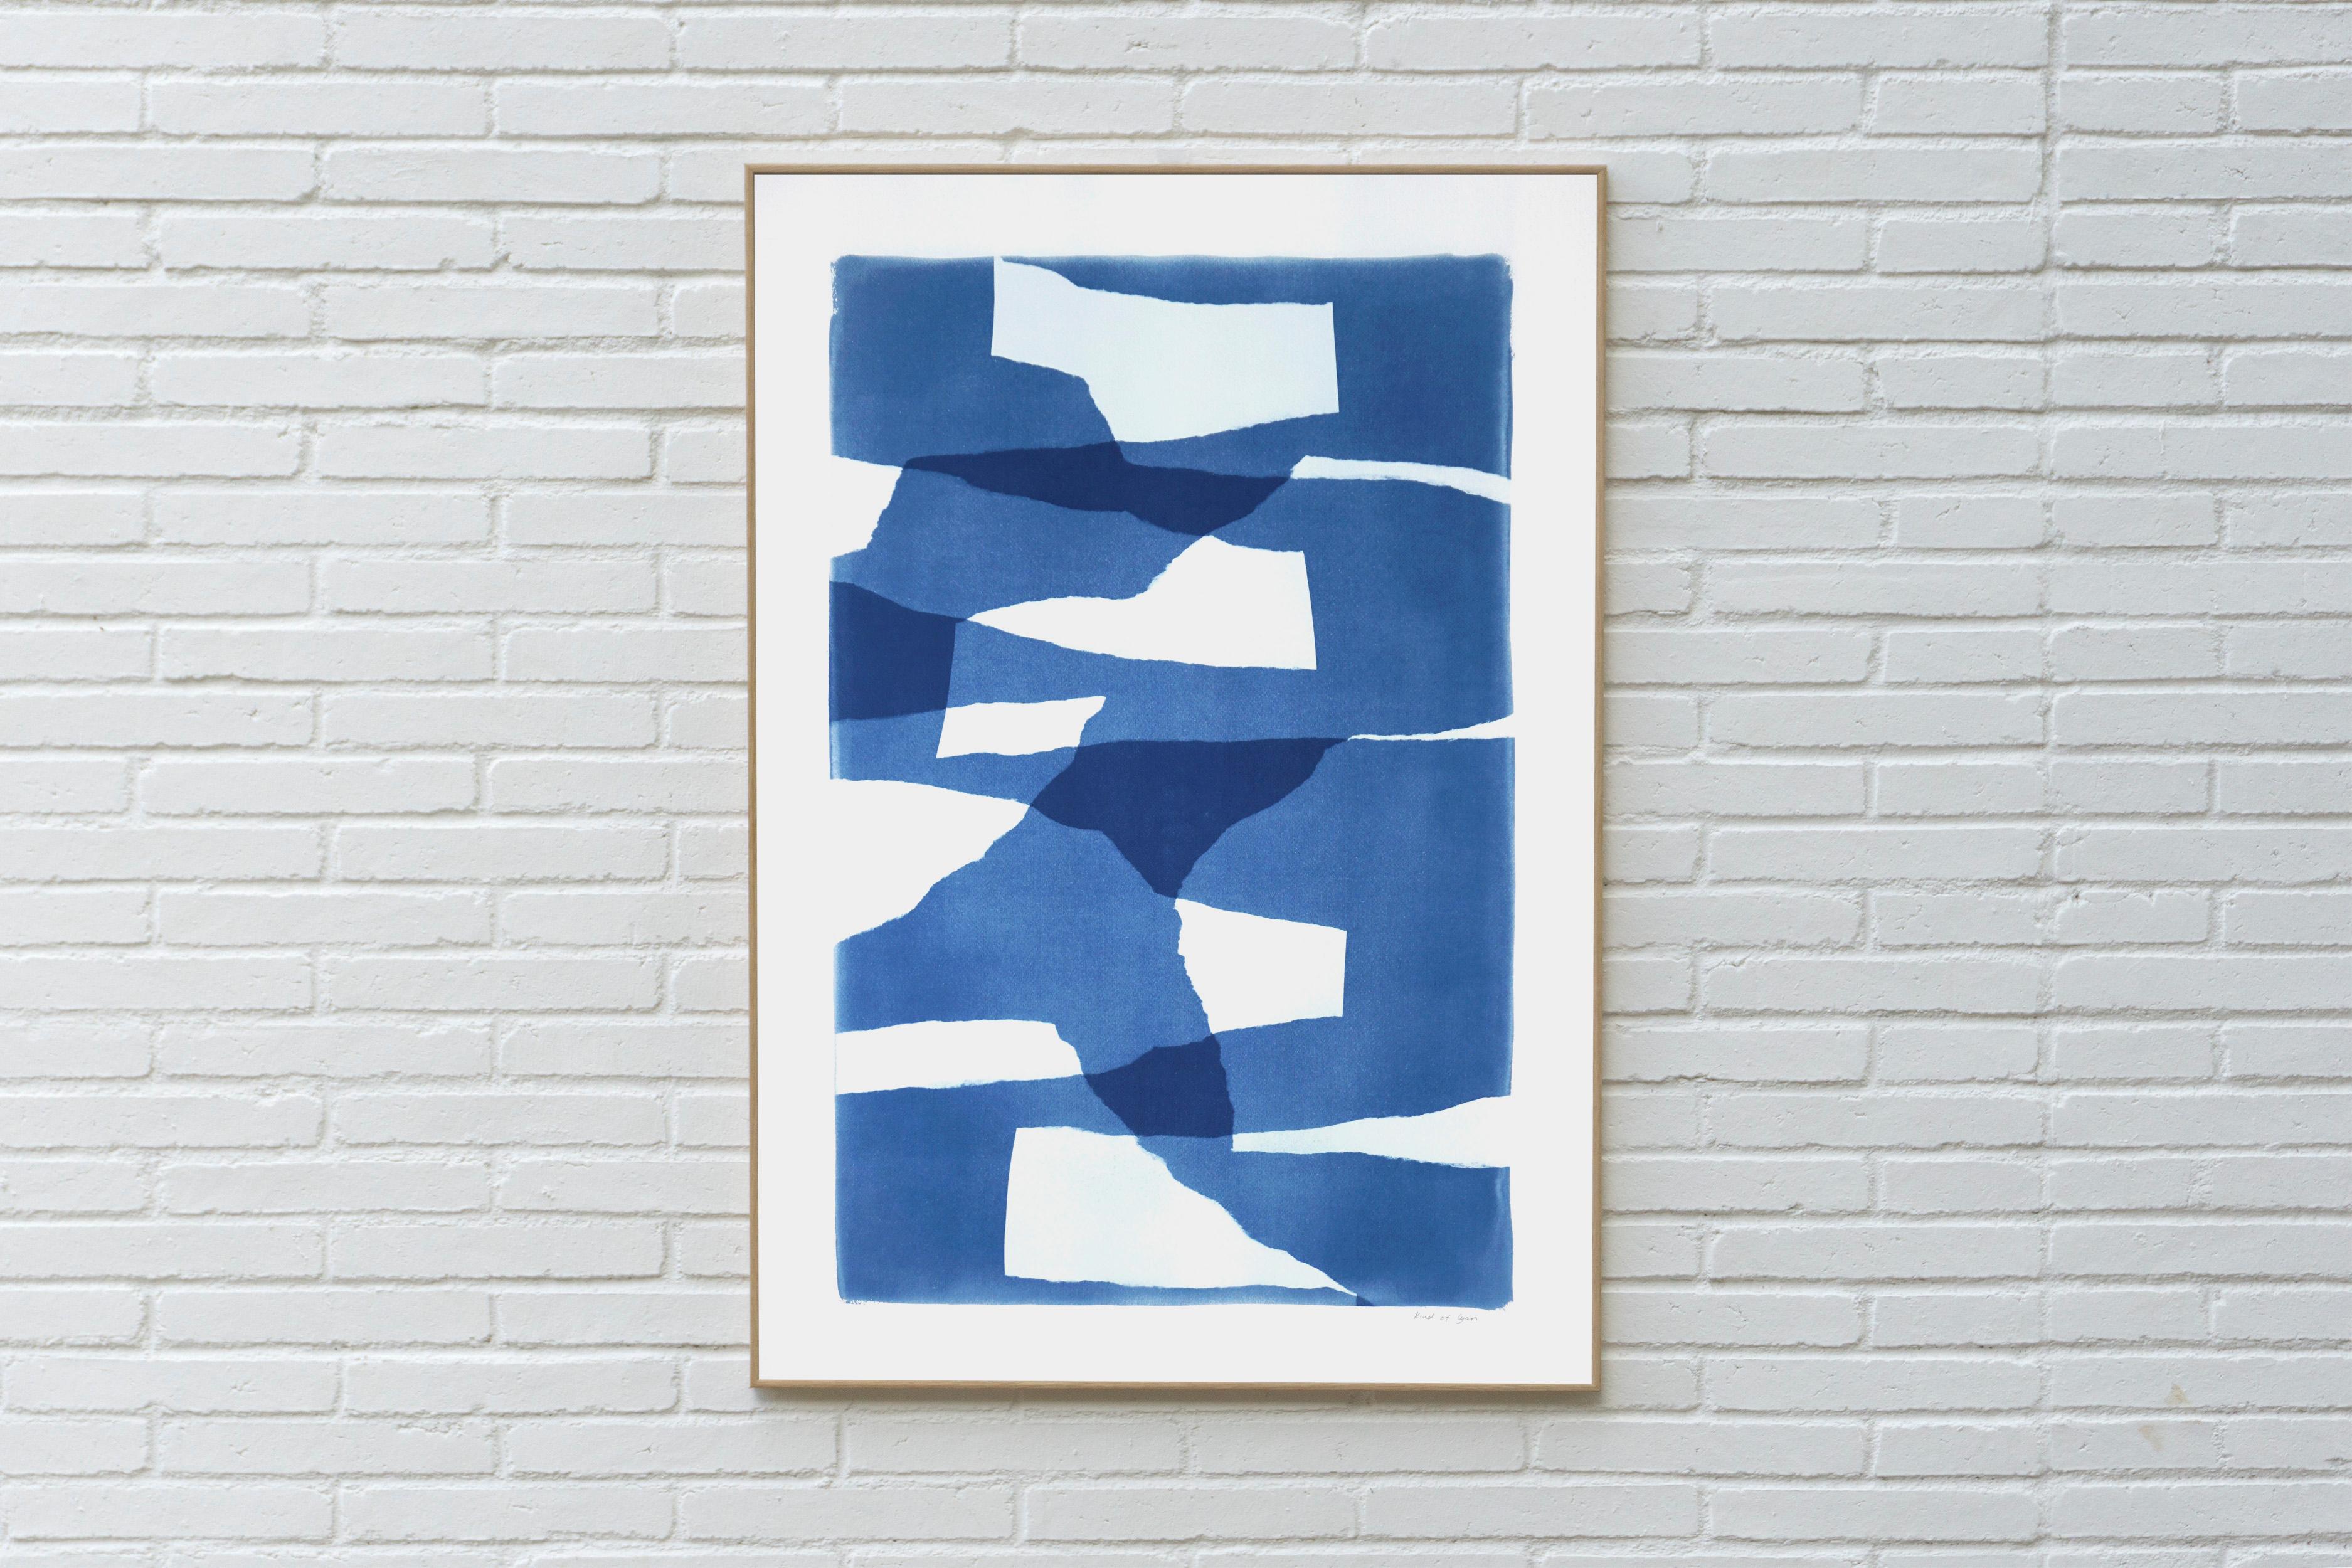 This is an exclusive handprinted unique cyanotype that takes its inspiration from the mid-century modern shapes.
It's made by layering paper cutouts and different exposures using uv-light. 

Details:
+ Title: Layered Torn Paper I
+ Year: 2021
+